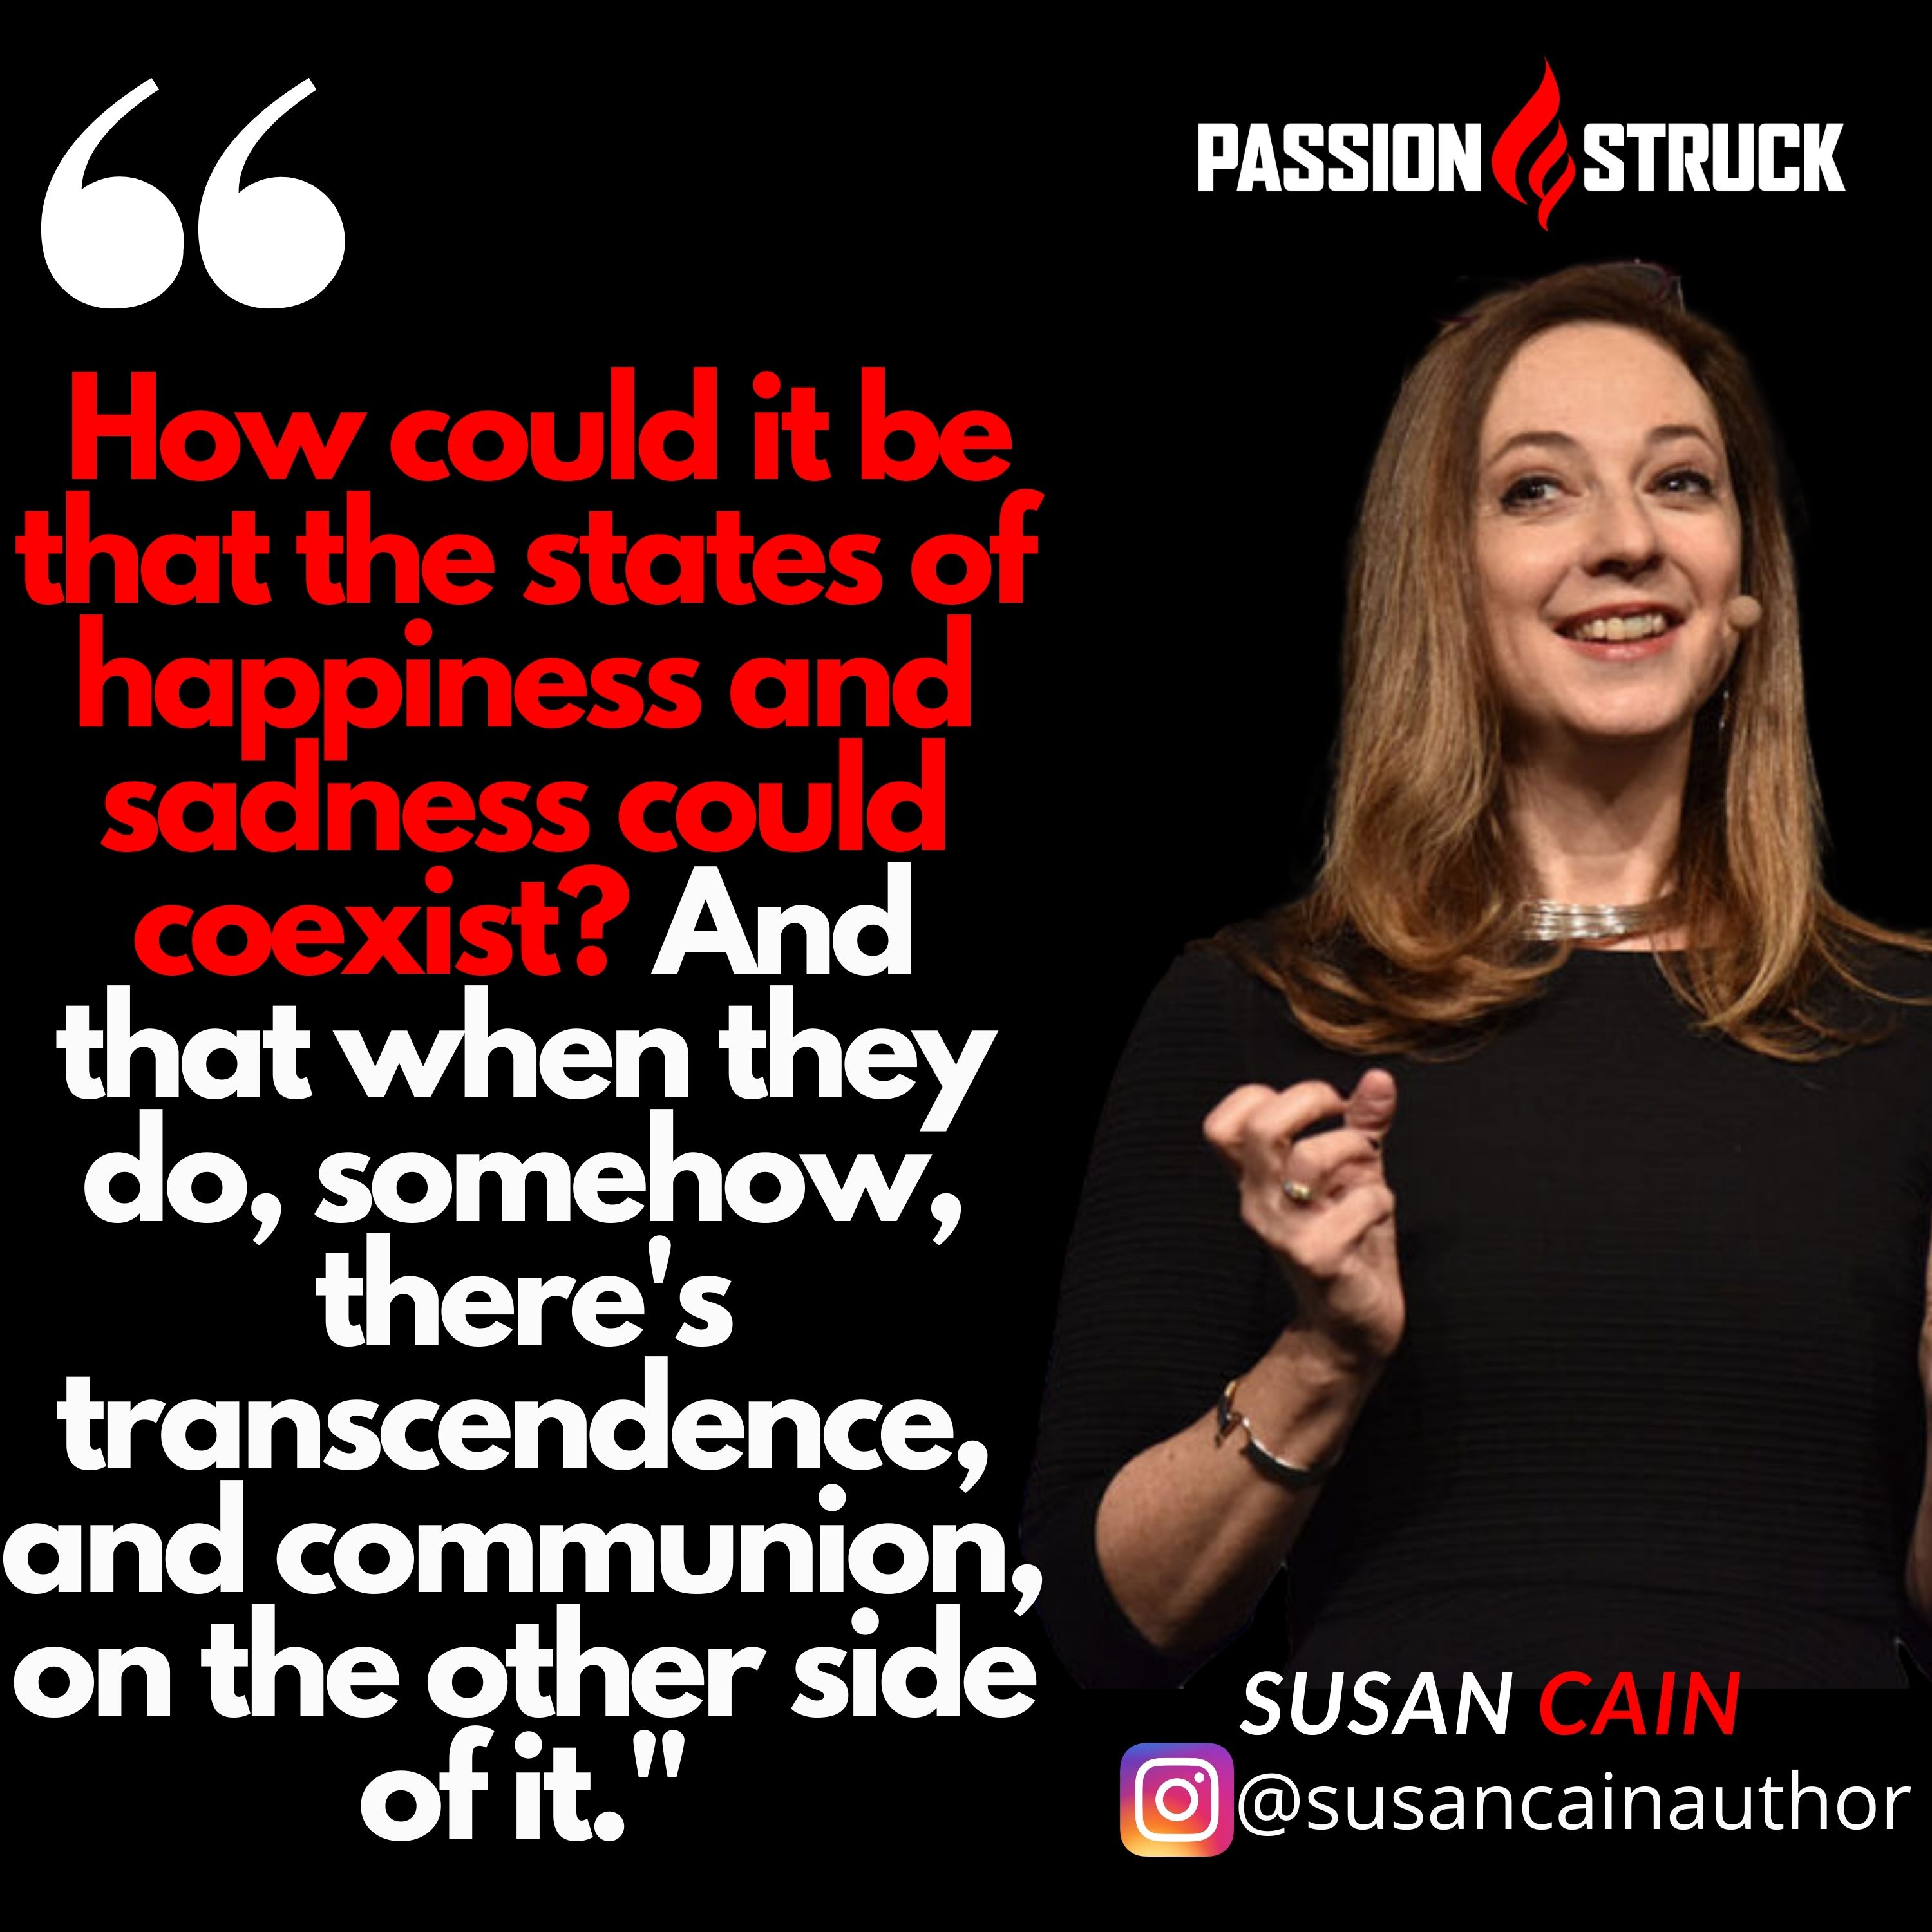 Susan Cain quote from Passion Struck podcast on the states of happiness and sorrow